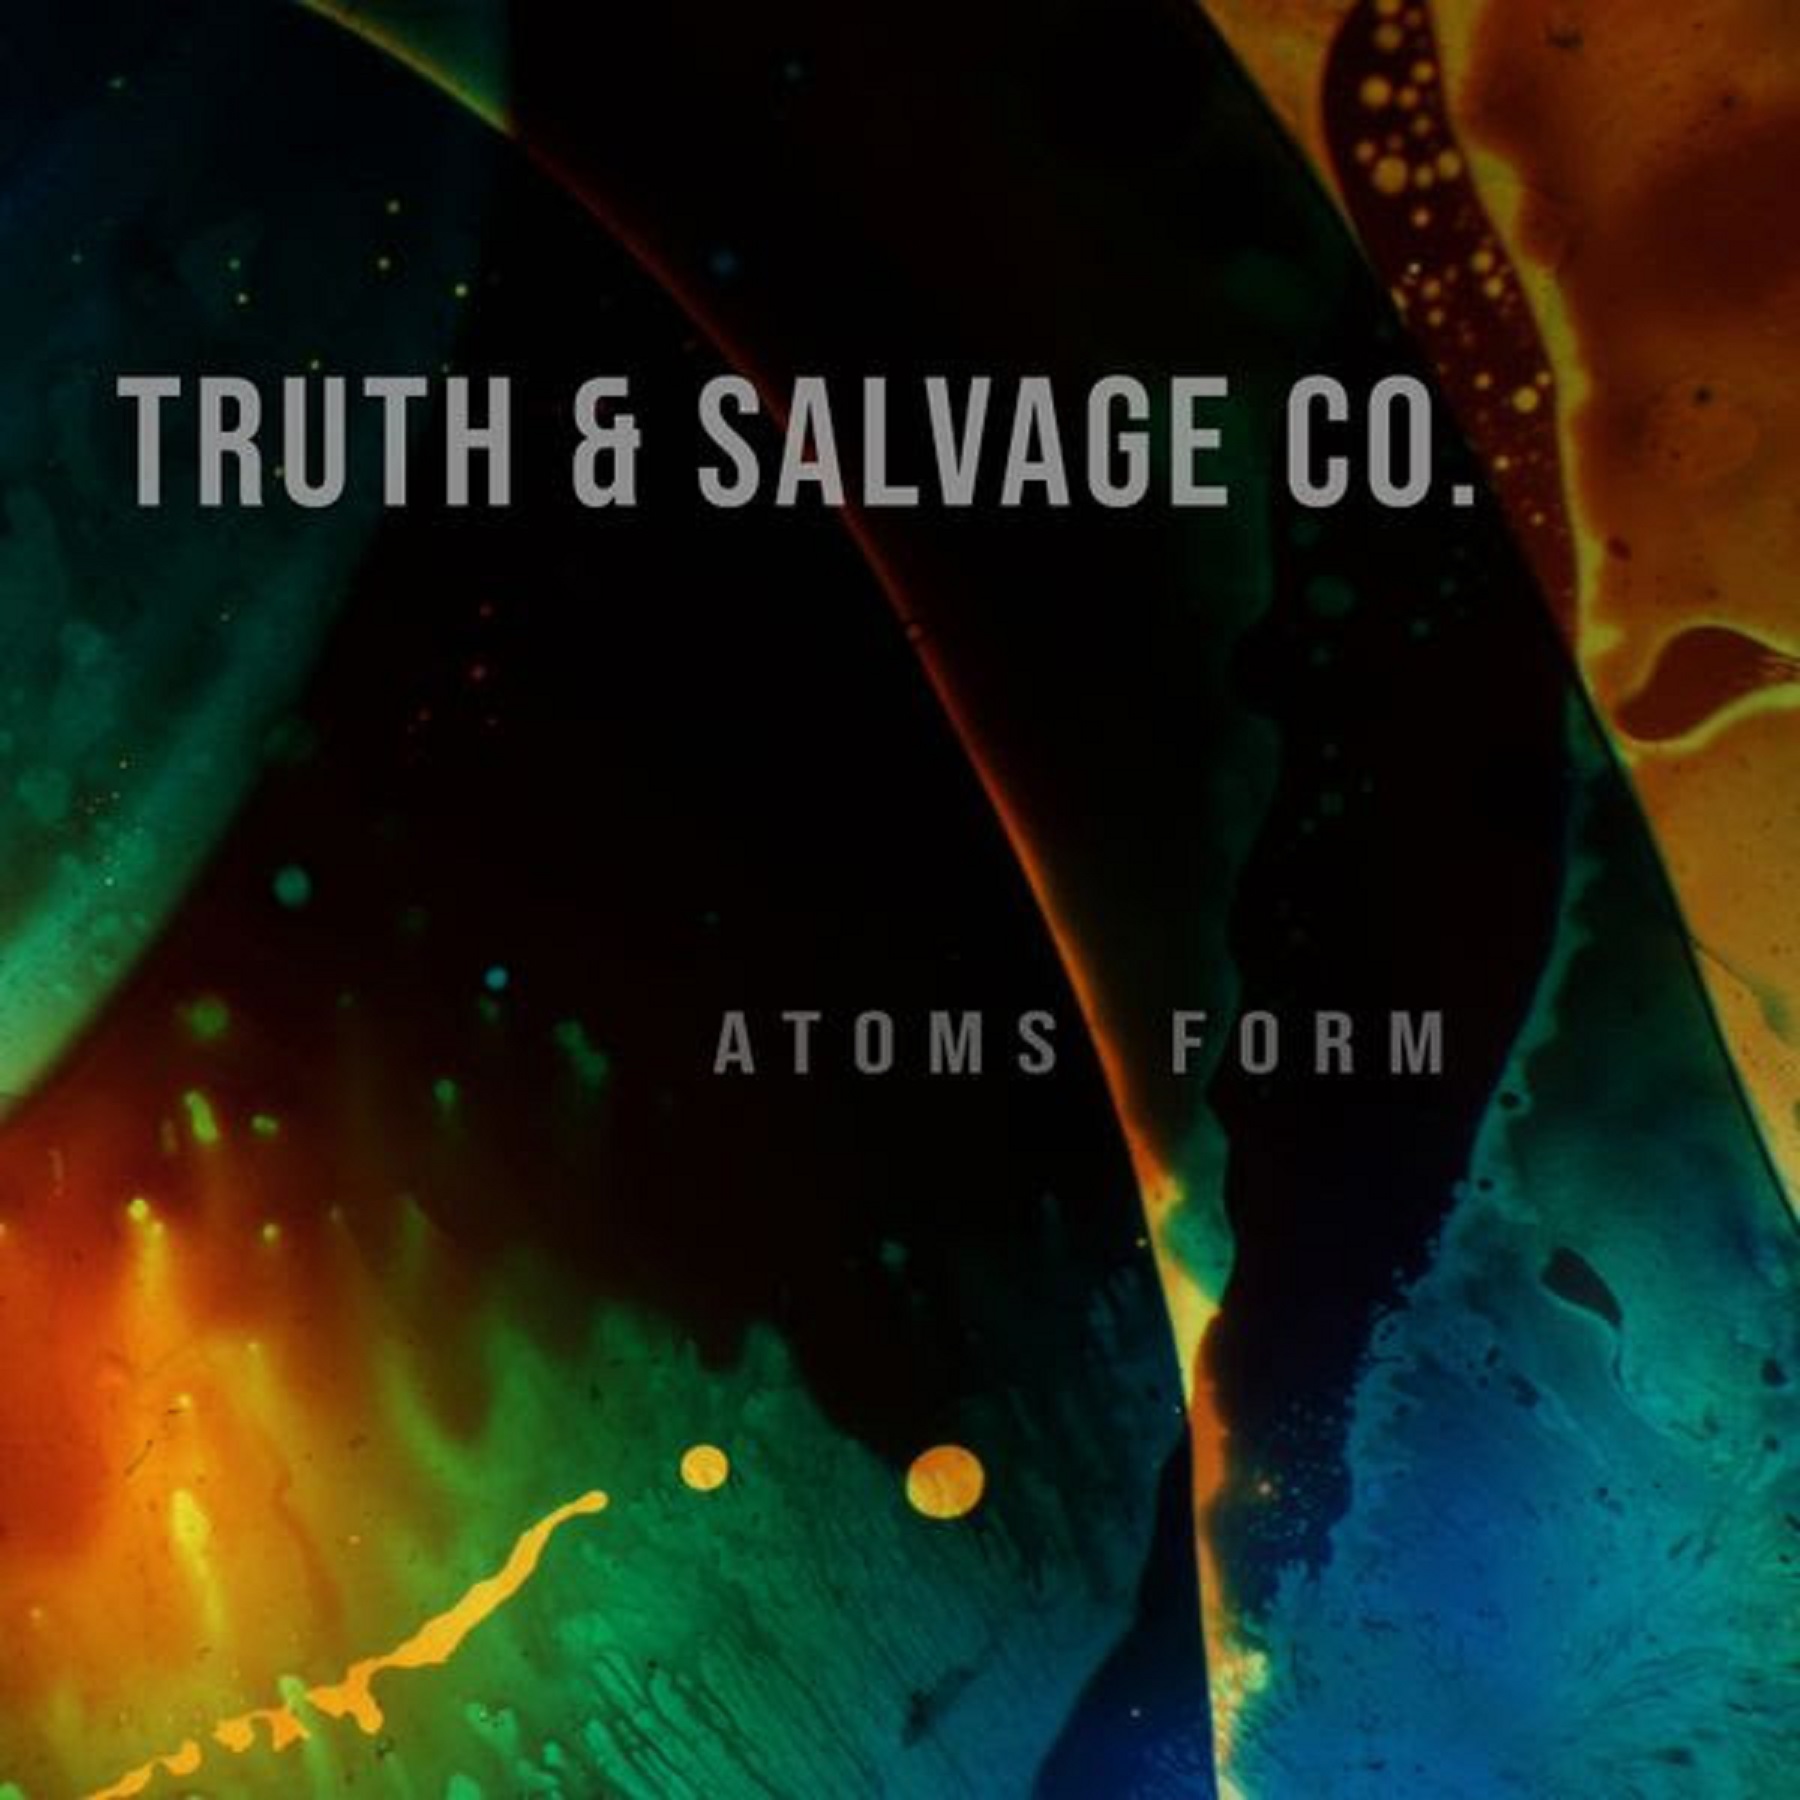 TRUTH & SALVAGE CO. PROUDLY ANNOUNCE THE RELEASE OF ATOMS FORM (OCTOBER 7TH, 2022)